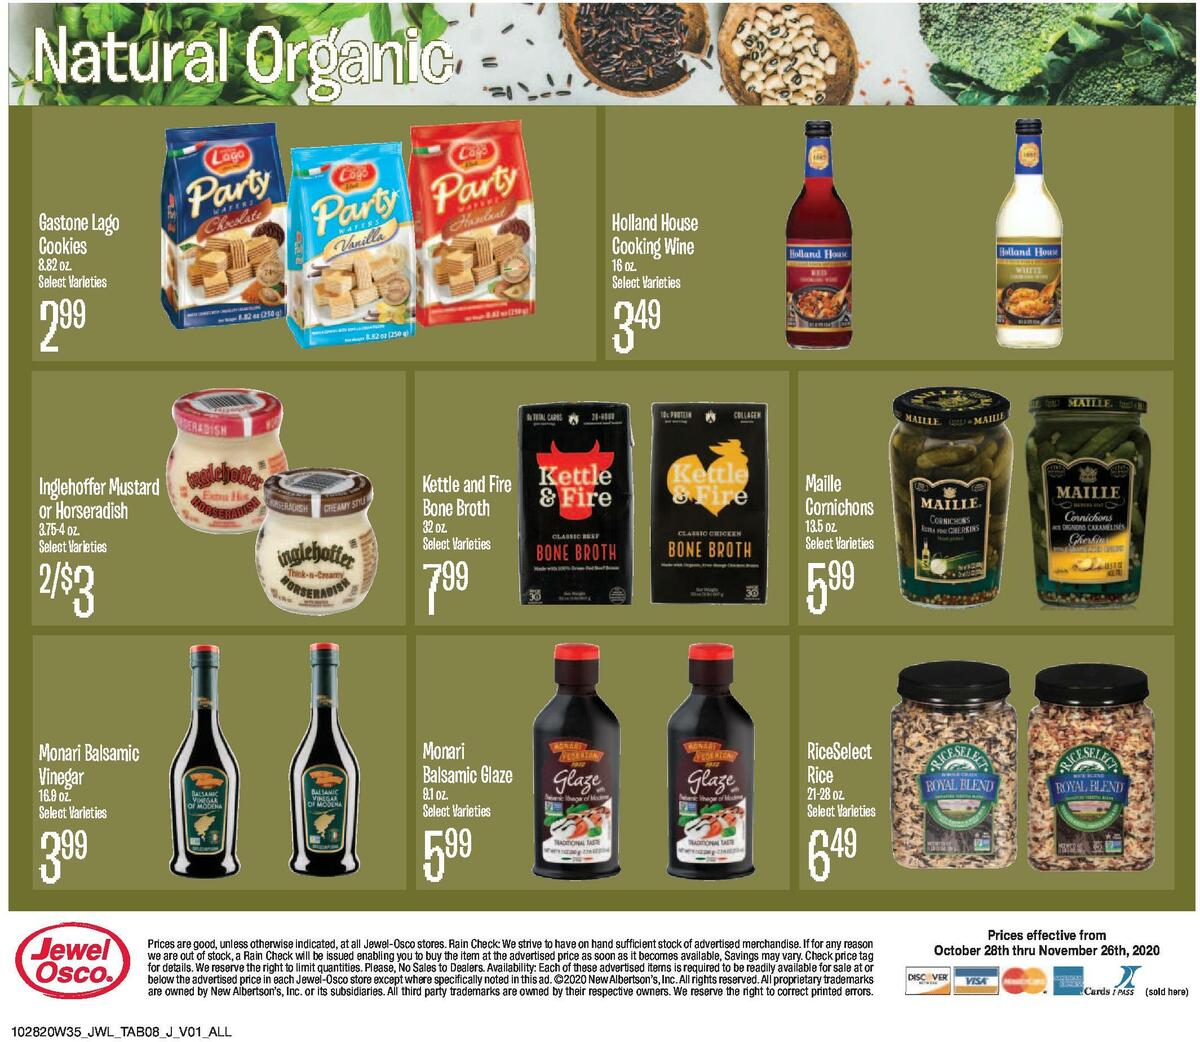 Jewel Osco Speciality Items and Seasonal Favorites Weekly Ad from October 28